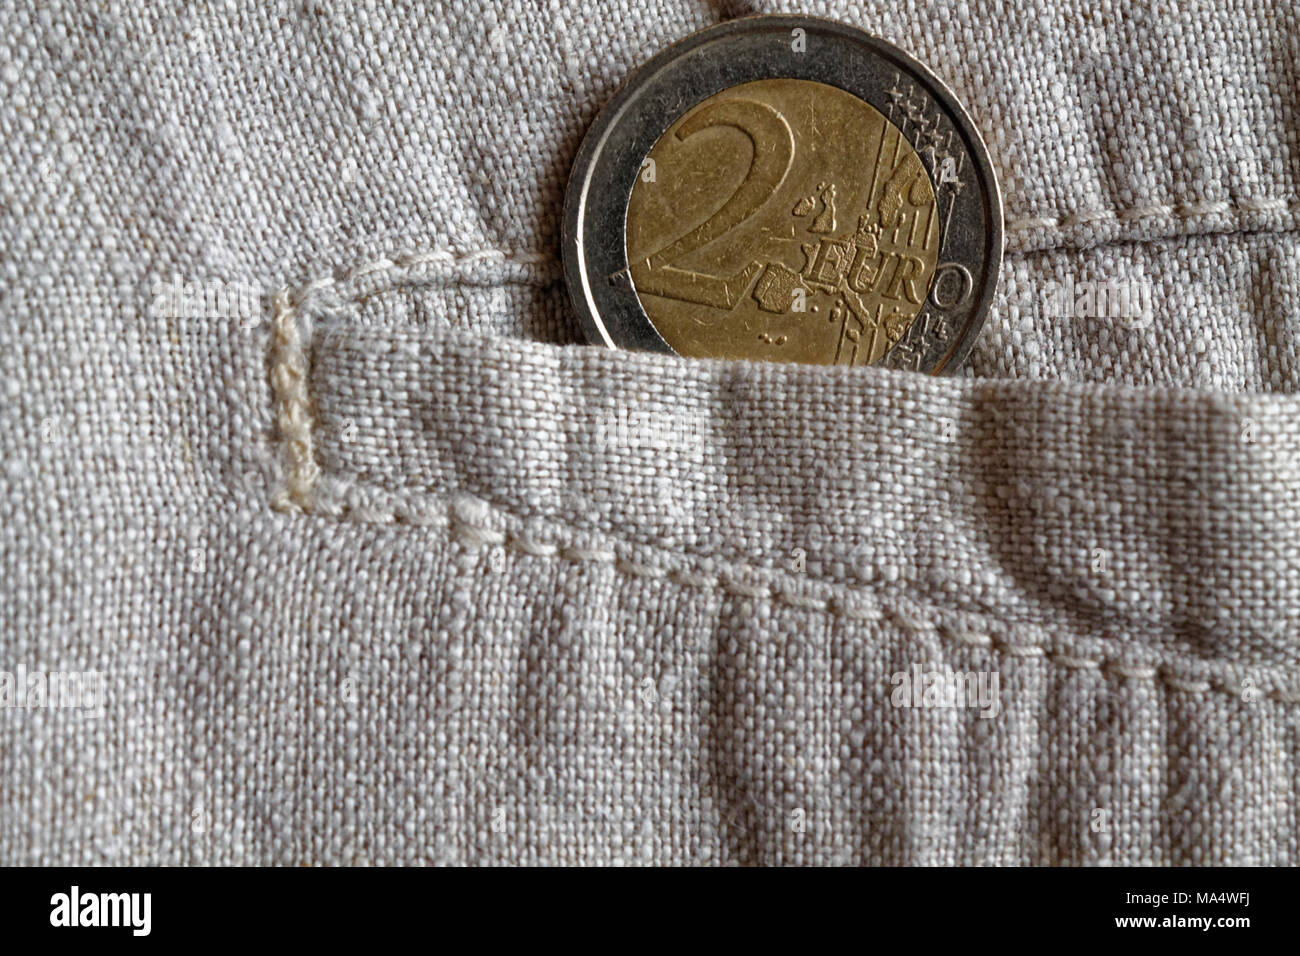 Euro coin with a denomination of two euros in the pocket of worn linen pants Stock Photo